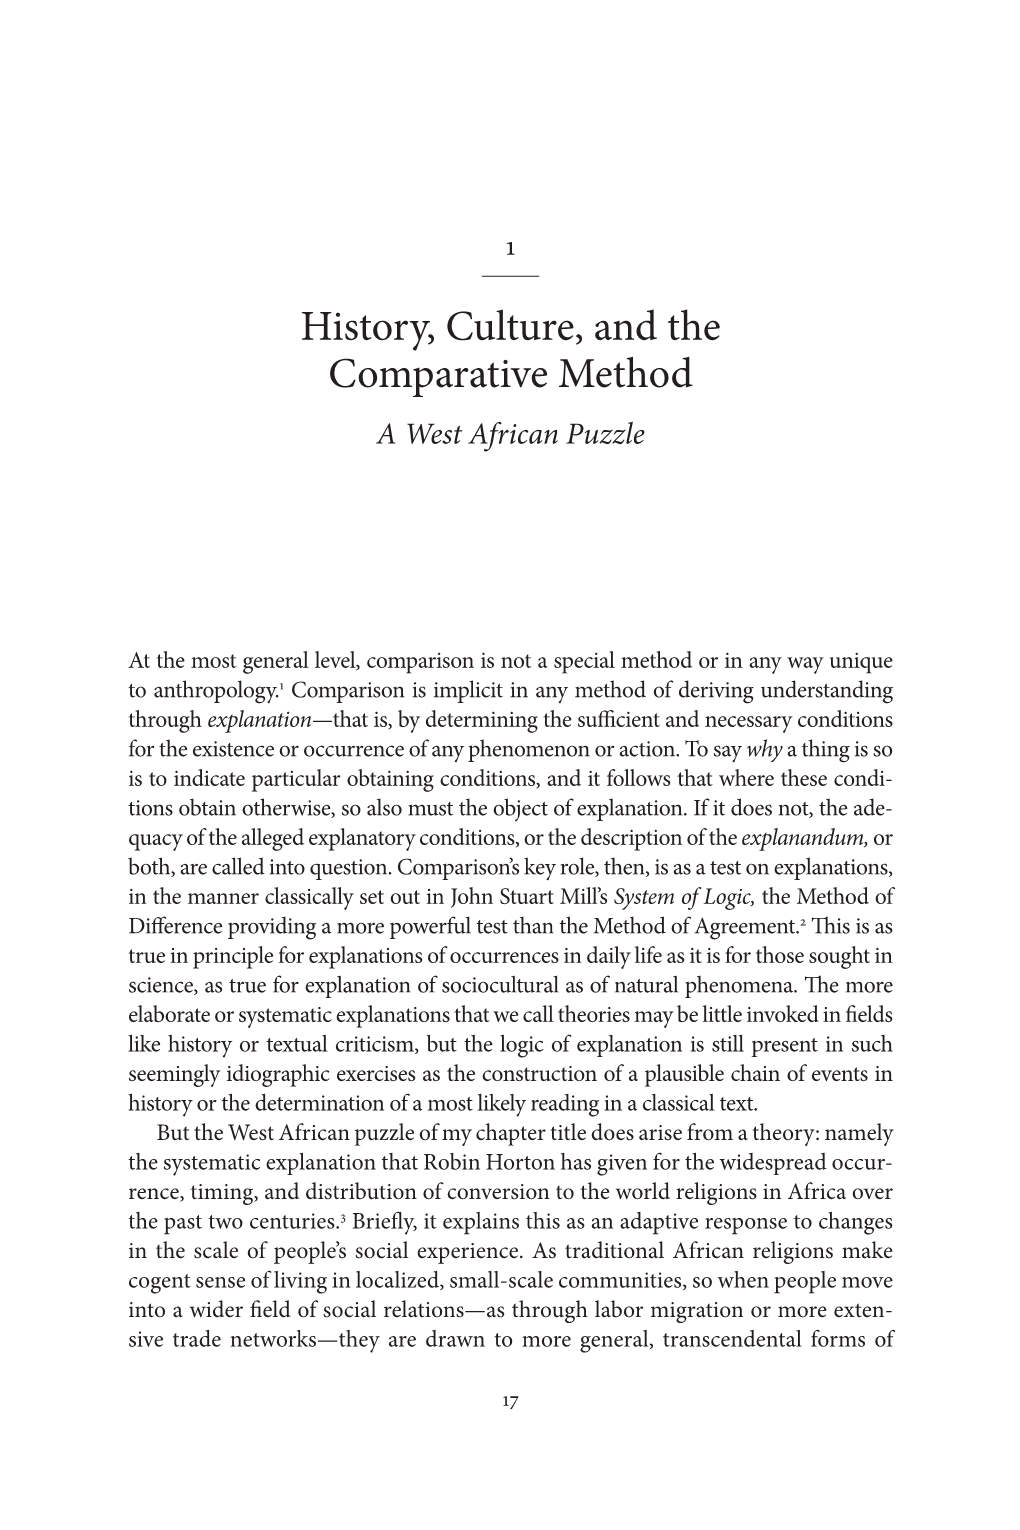 History, Culture, and the Comparative Method